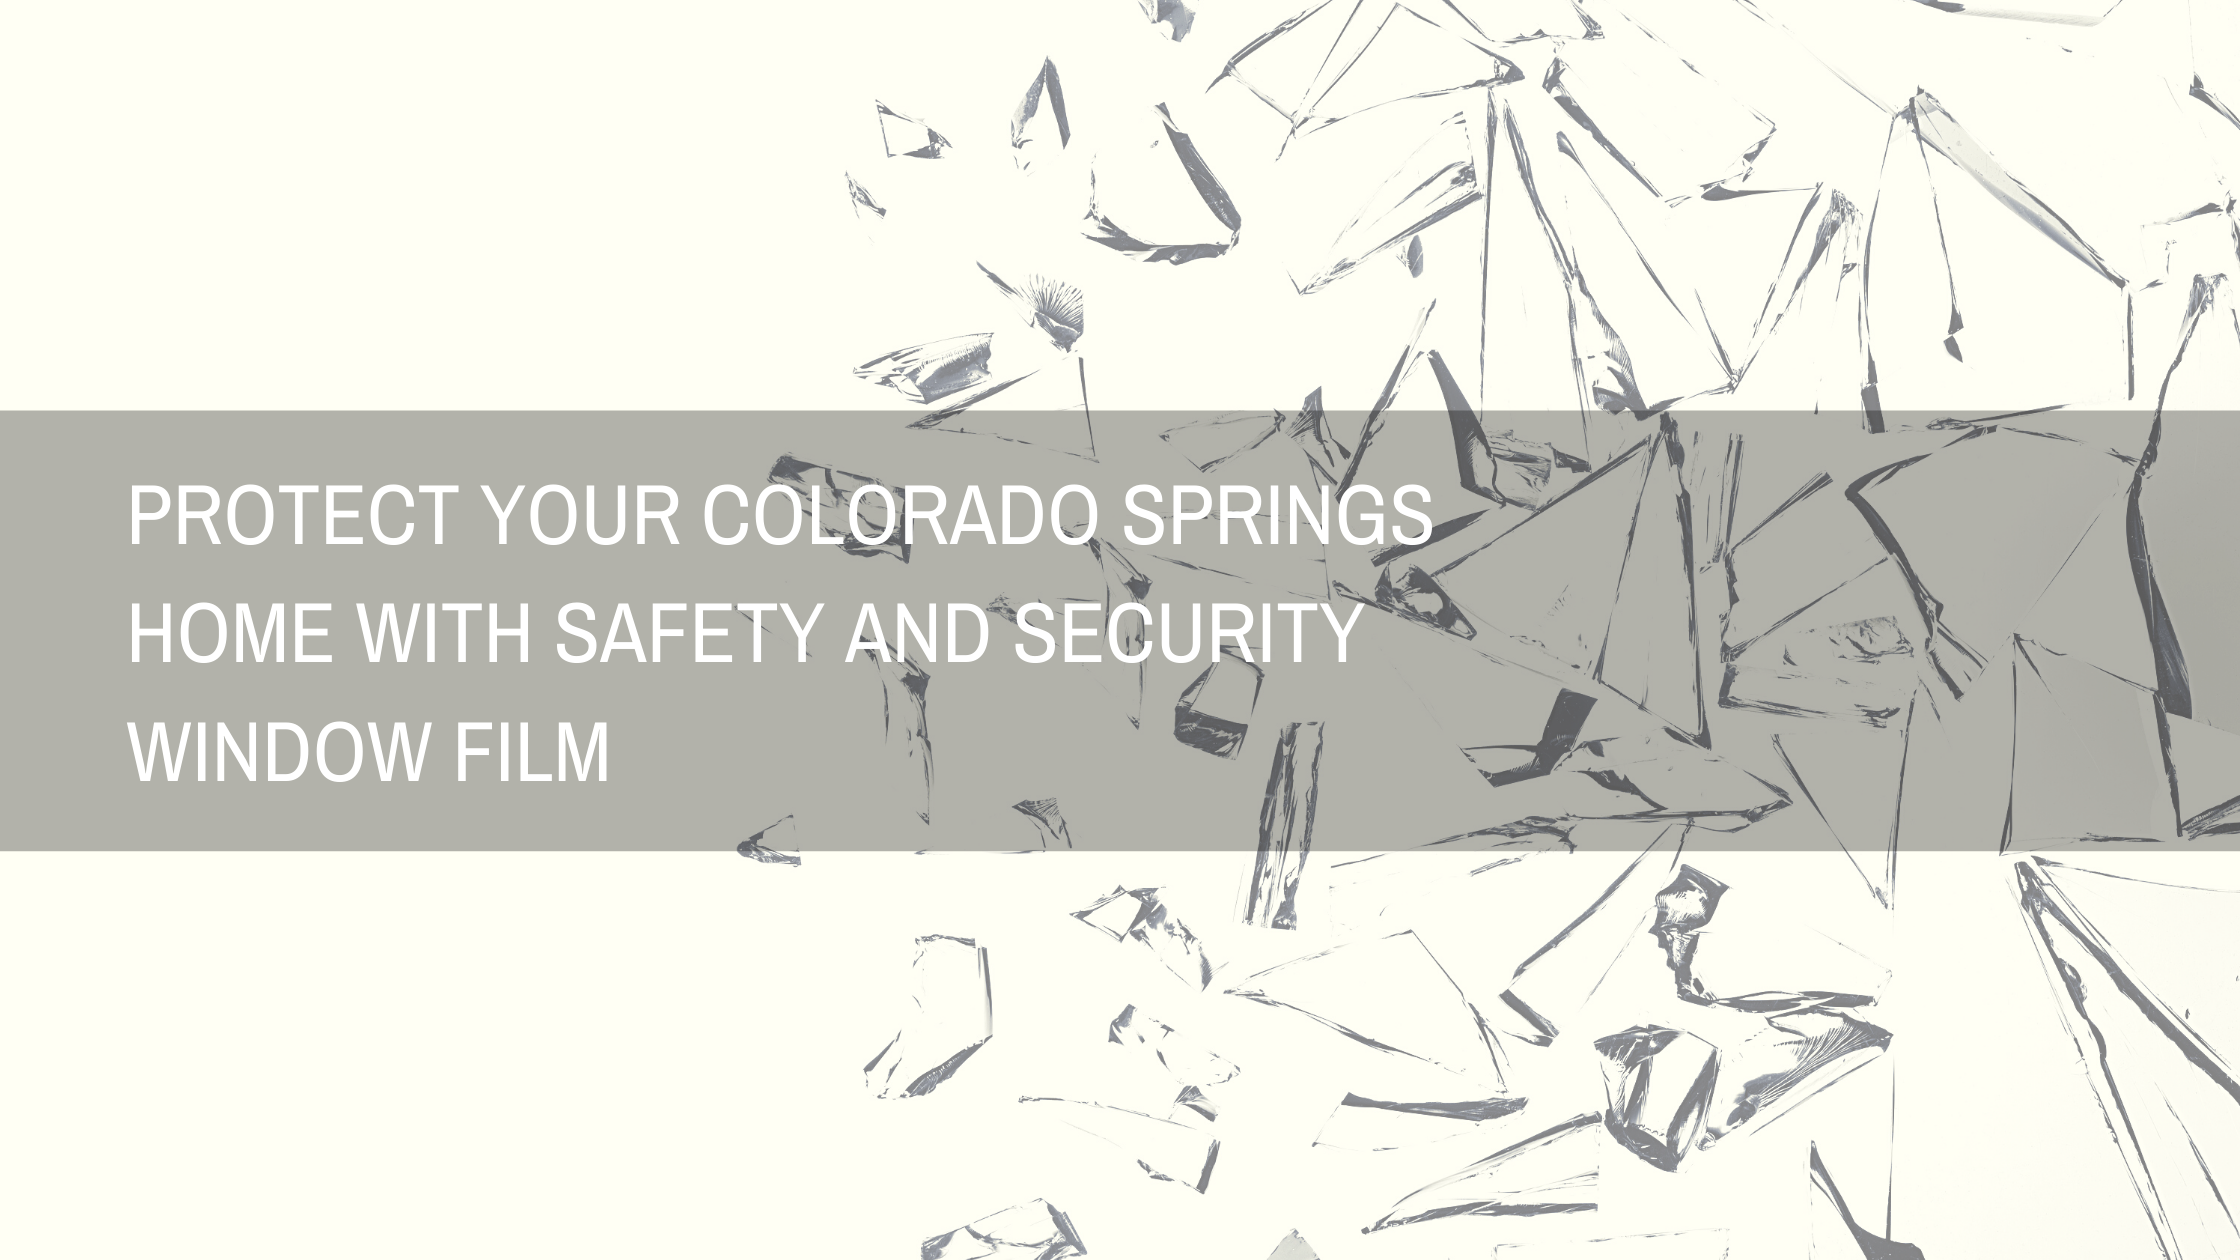 Protect Your Colorado Springs Home with Safety and Security Window Film